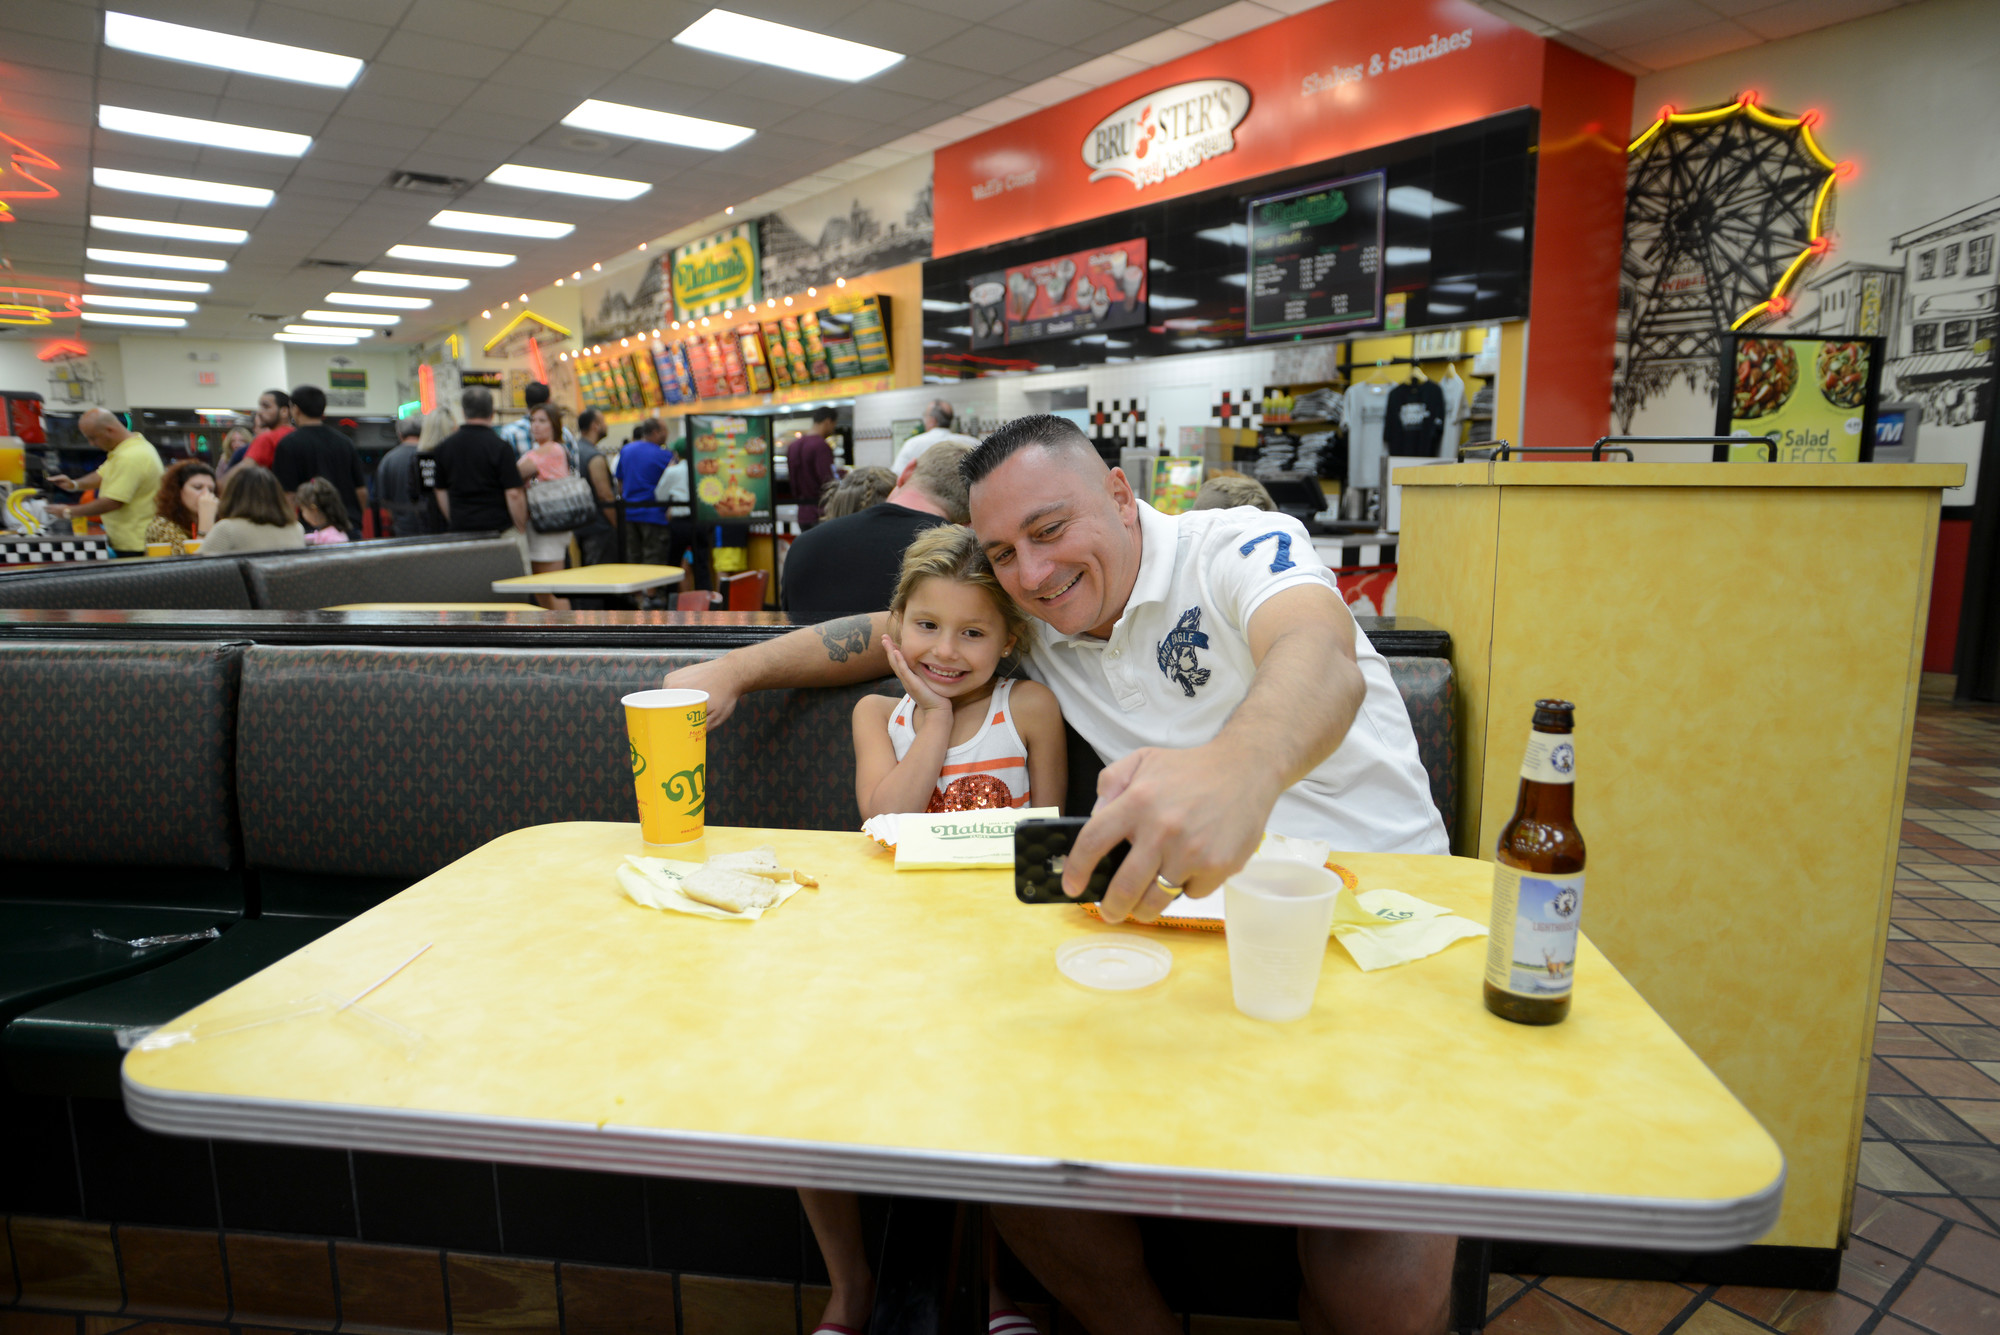 Ava and Frank Morizio took a selfie as they enjoyed their last taste of Nathan’s.